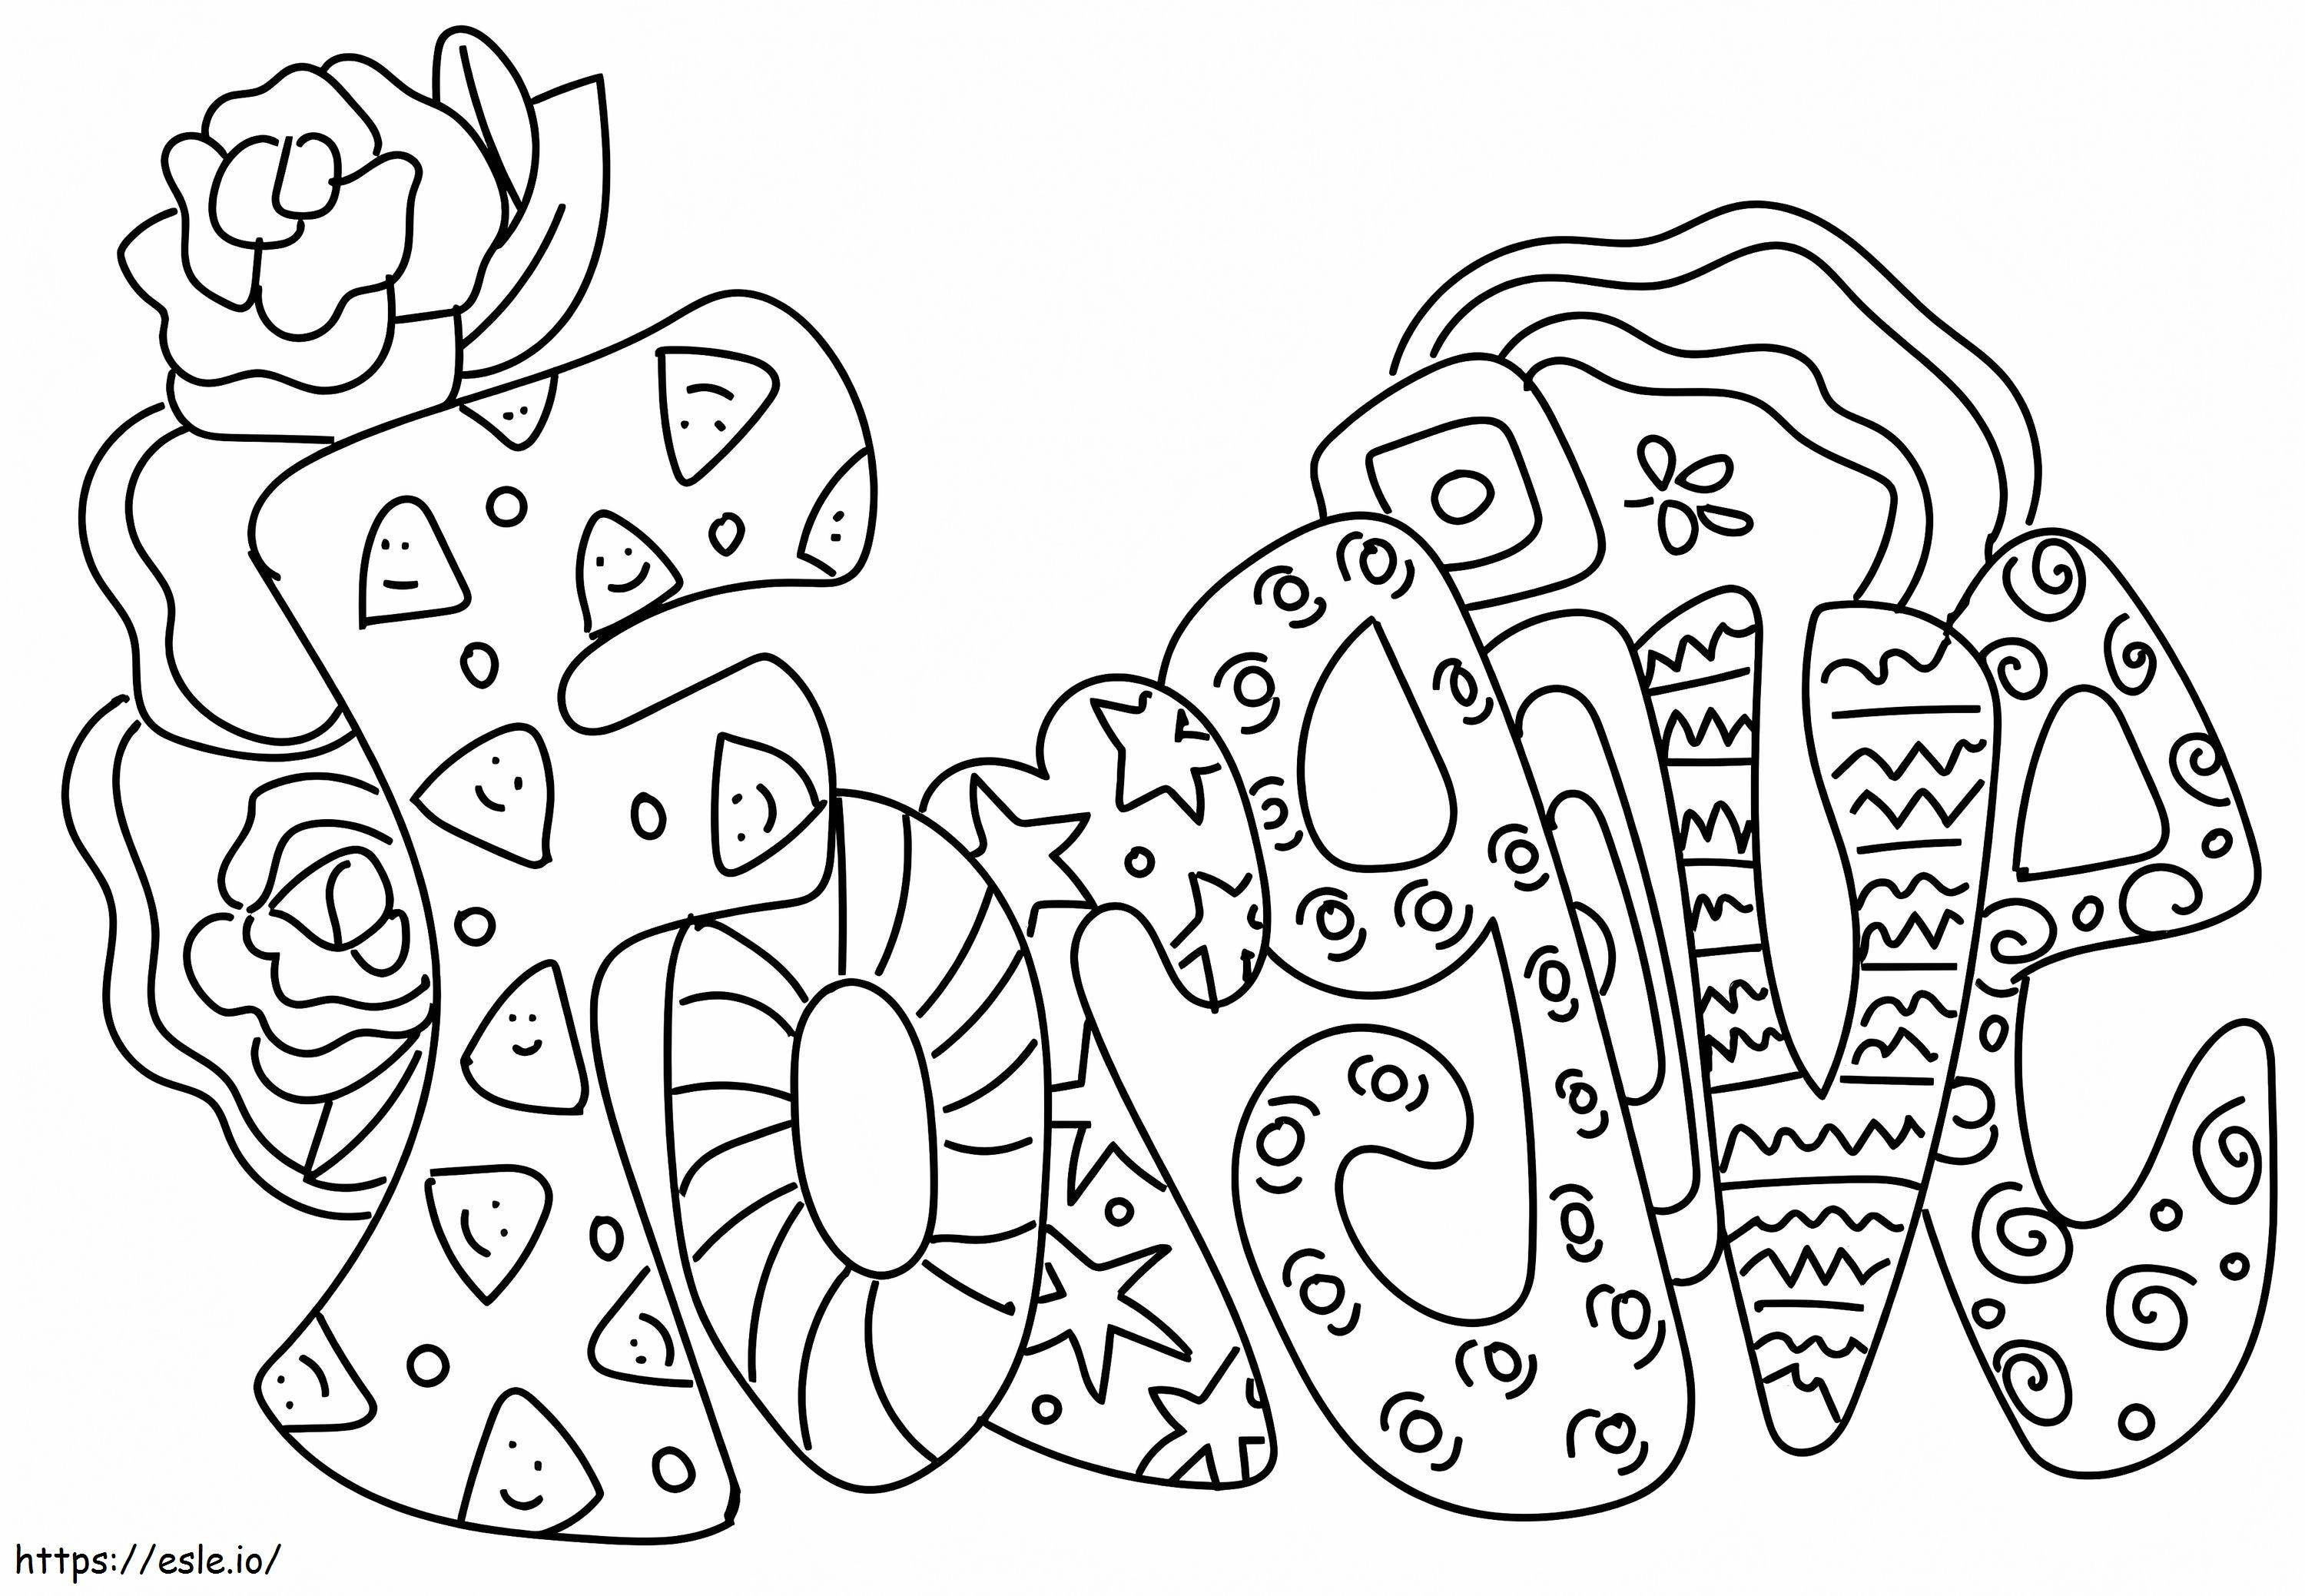 Forgive coloring page